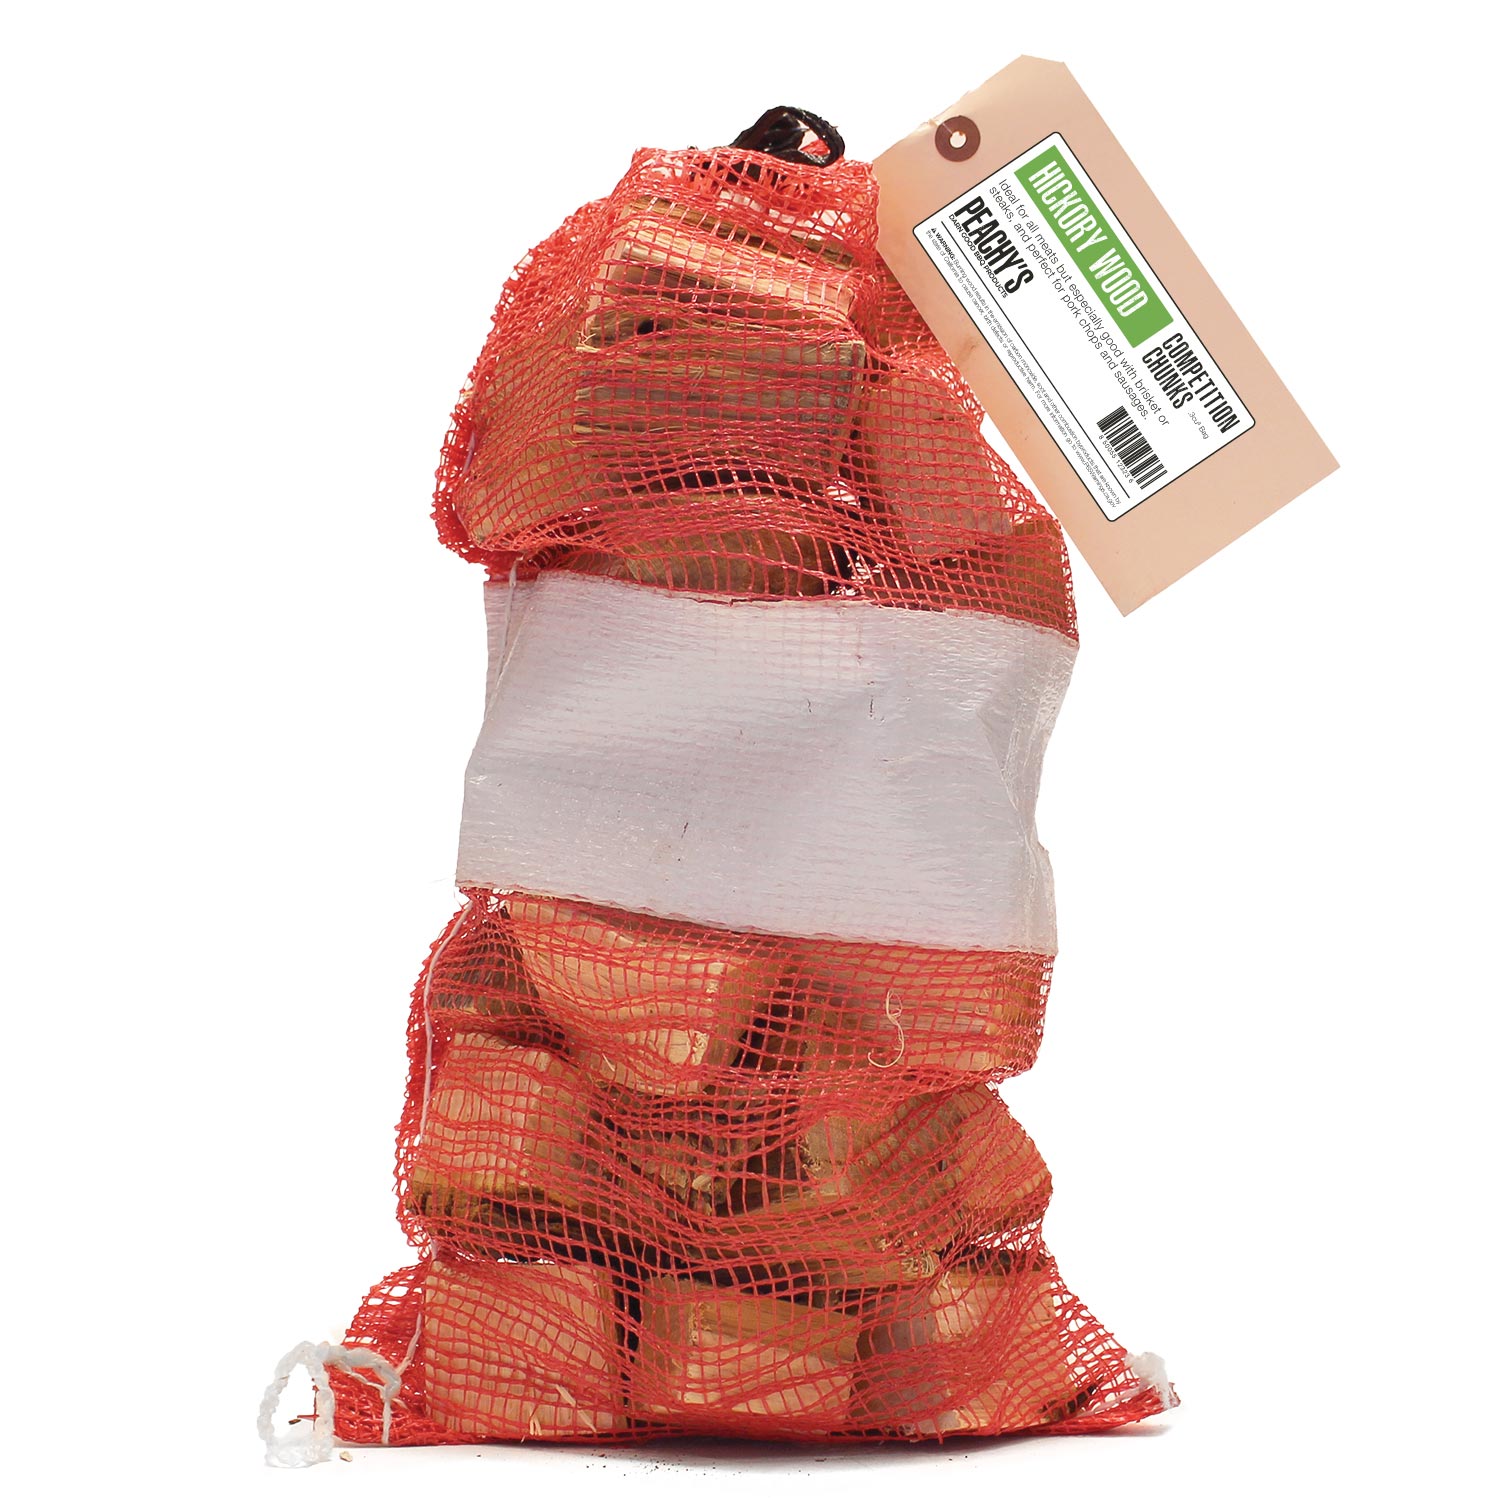 HICKORY Competition Chunks | .3cu³ Bag by PEACHY'S